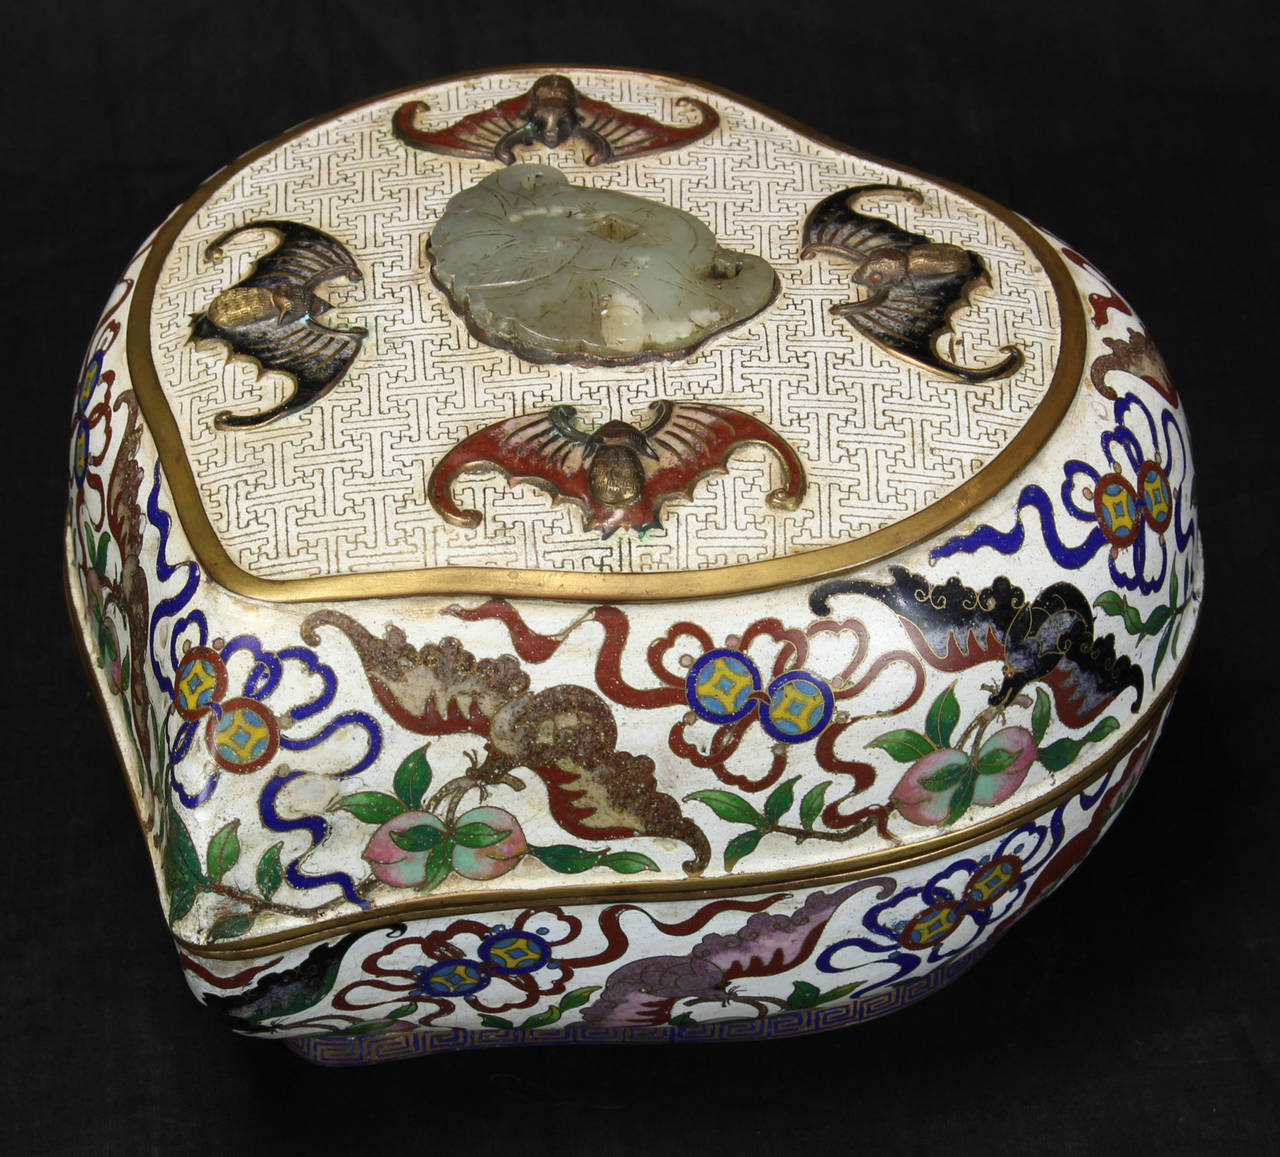 A large late 19th century Chinese cloisonné peach-shaped box with bat decoration and set with jade or jadeite stone. The box is elaborately decorated inside and on the bottom. Bats and peaches symbolize fortune and longevity in Chinese culture.